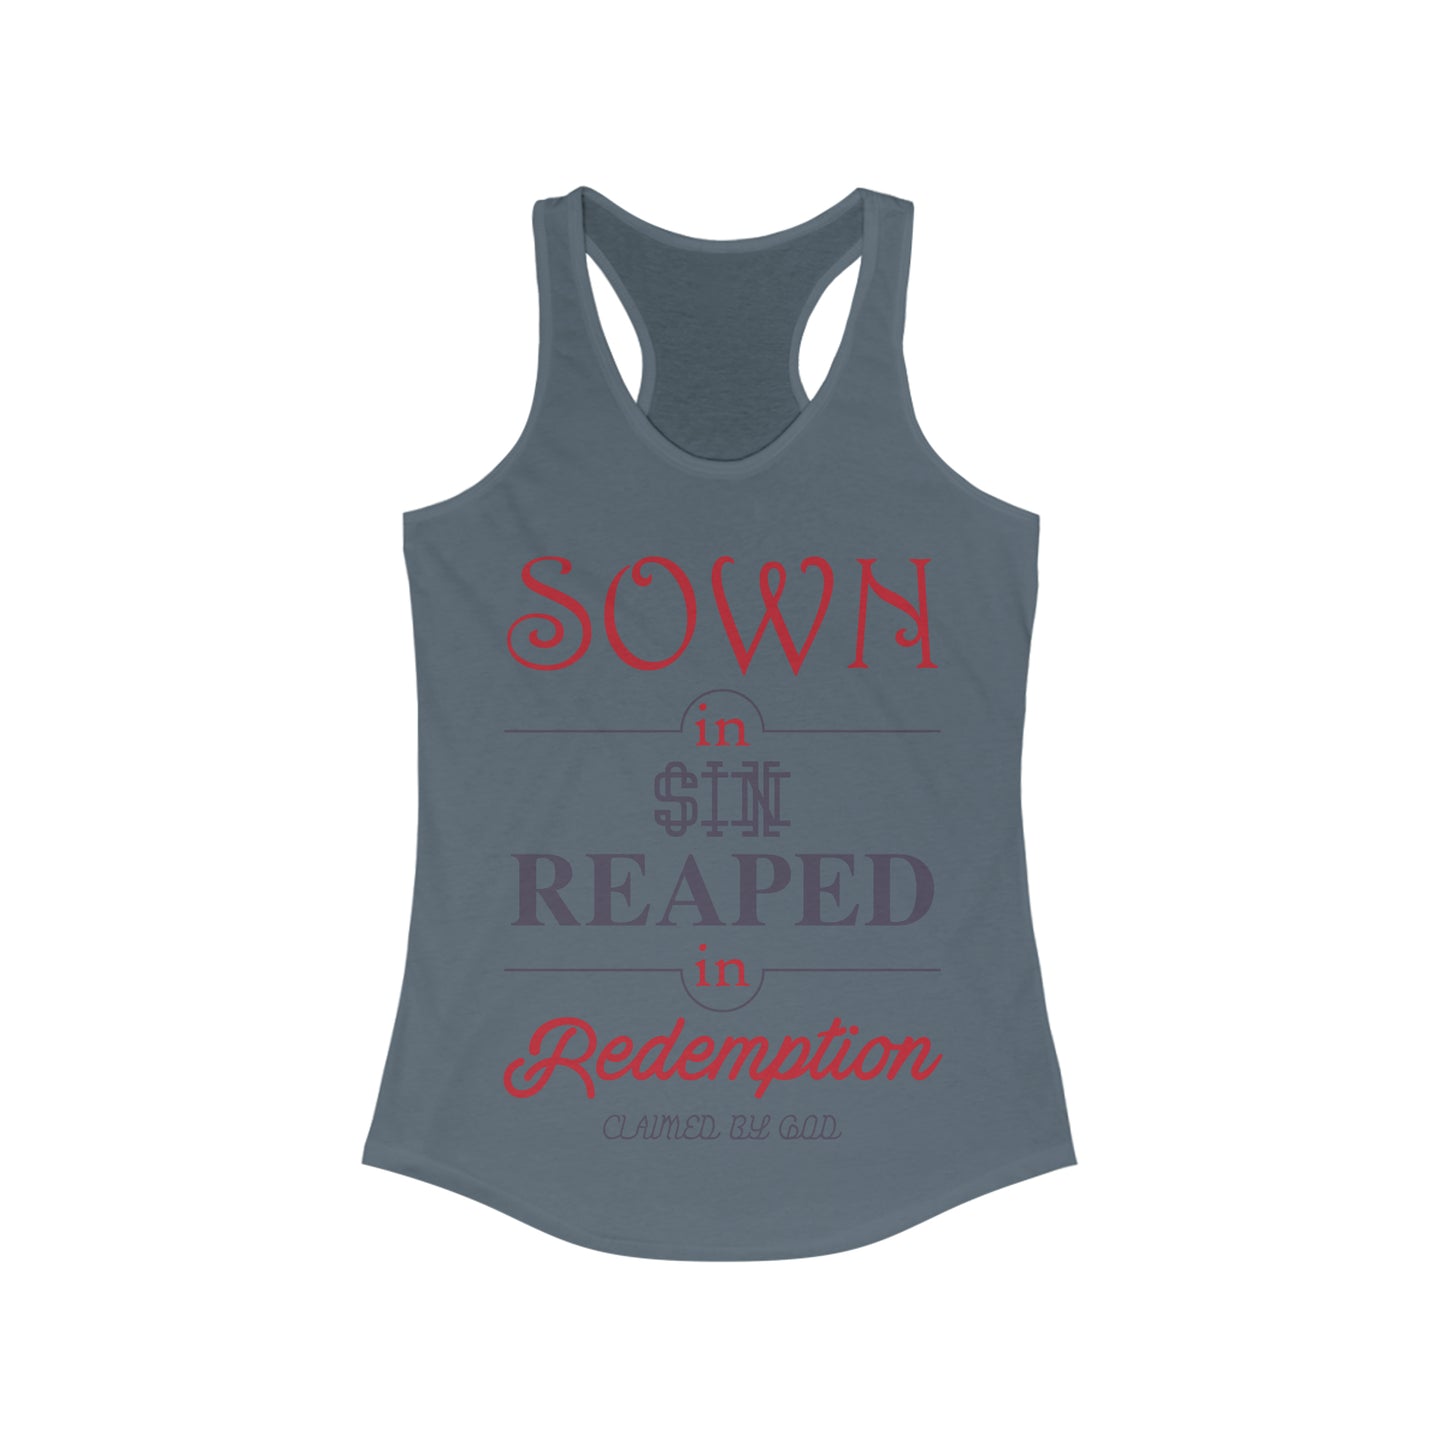 Sown in sin reaped in redemption slim fit tank-top